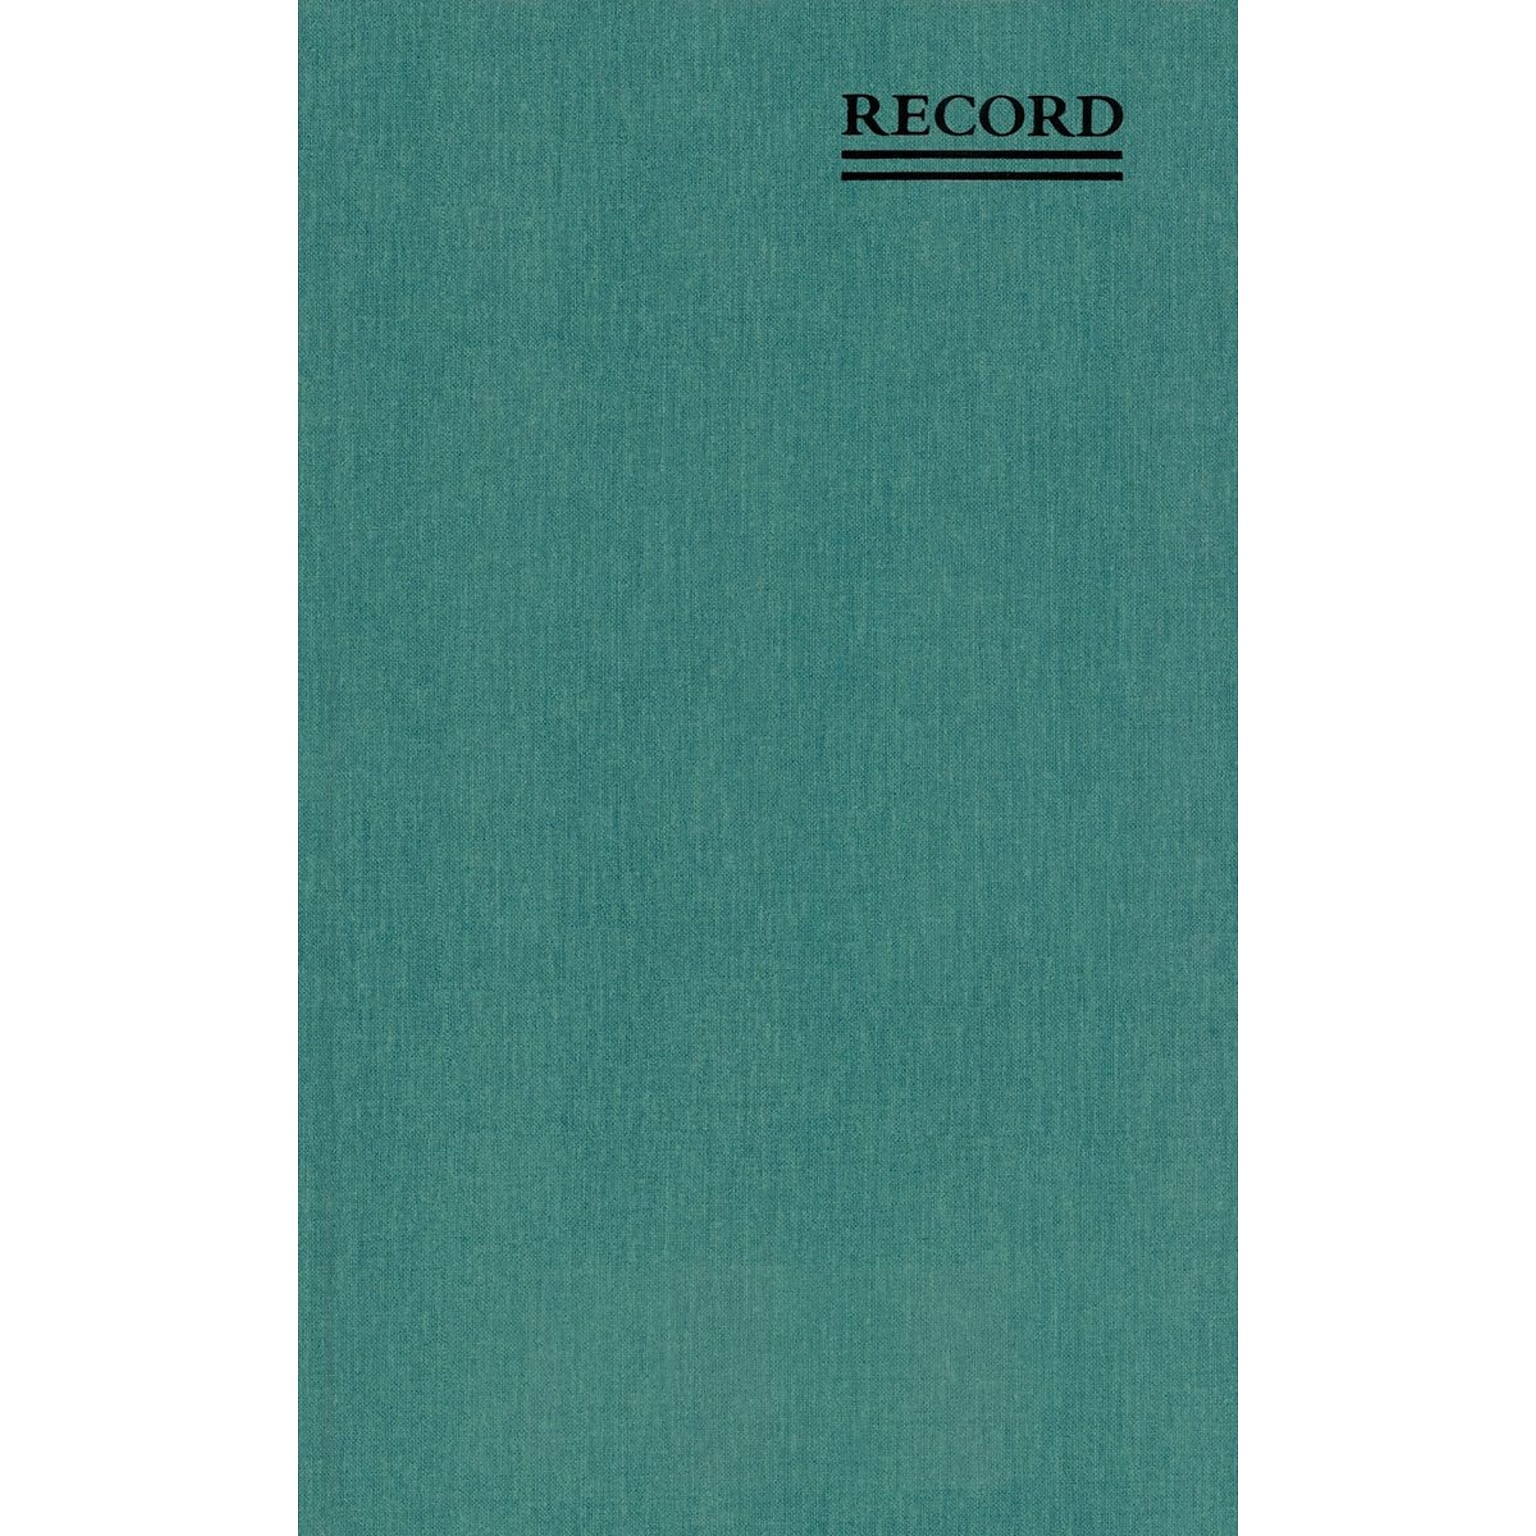 Rediform Emerald Series Record Book, 7.25 x 12.25, Green, 75 Sheets/Book (RED56111)